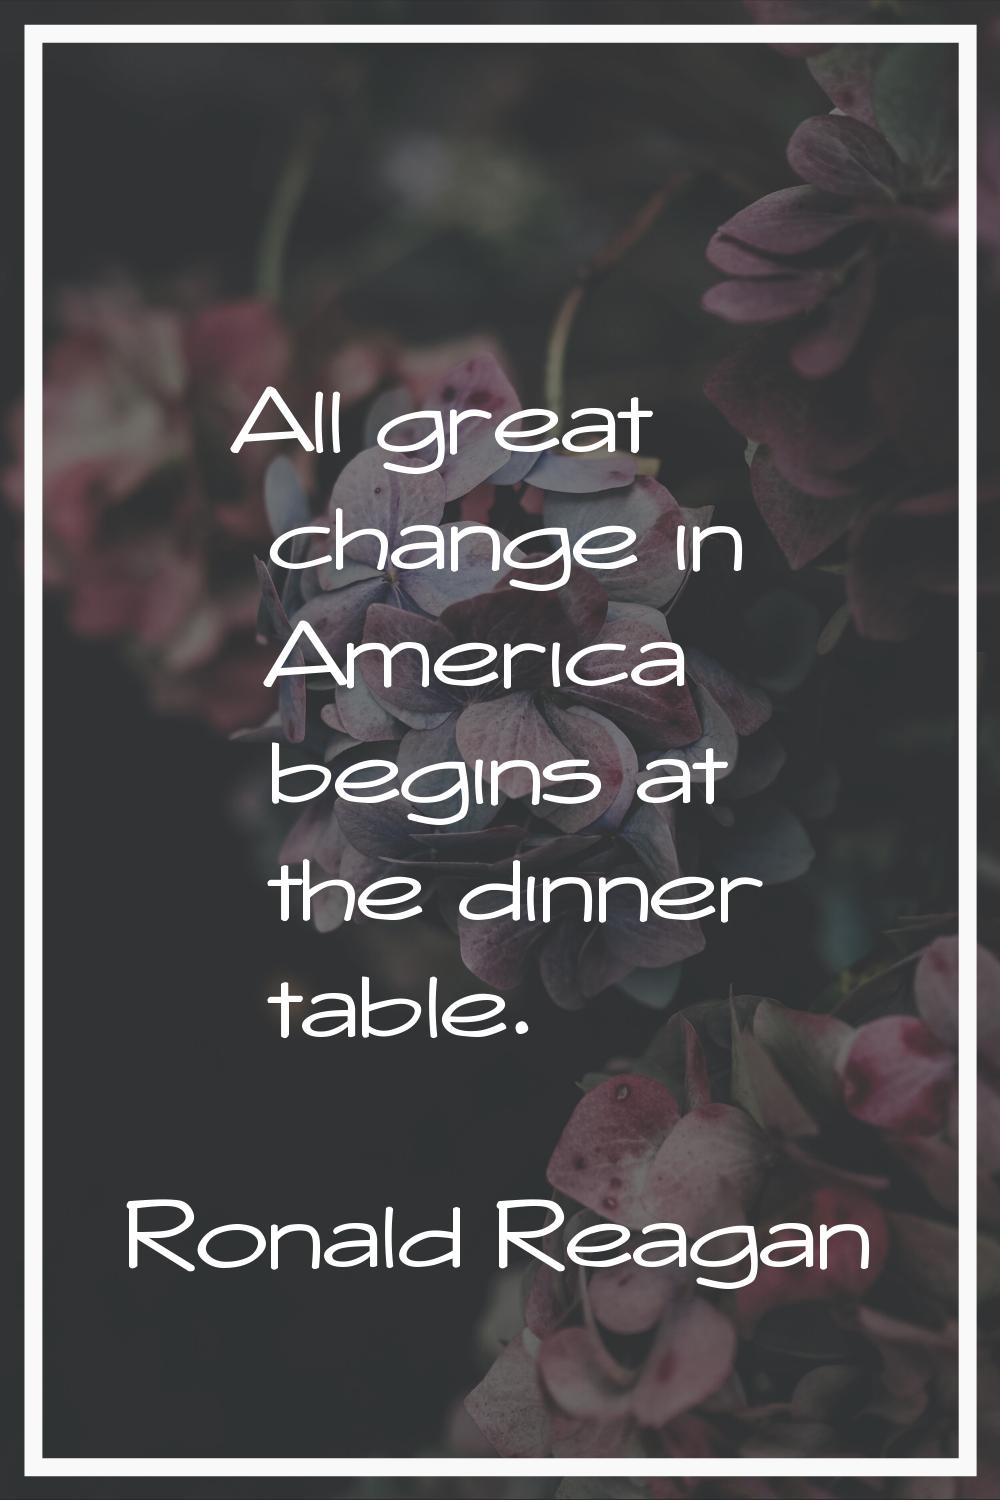 All great change in America begins at the dinner table.